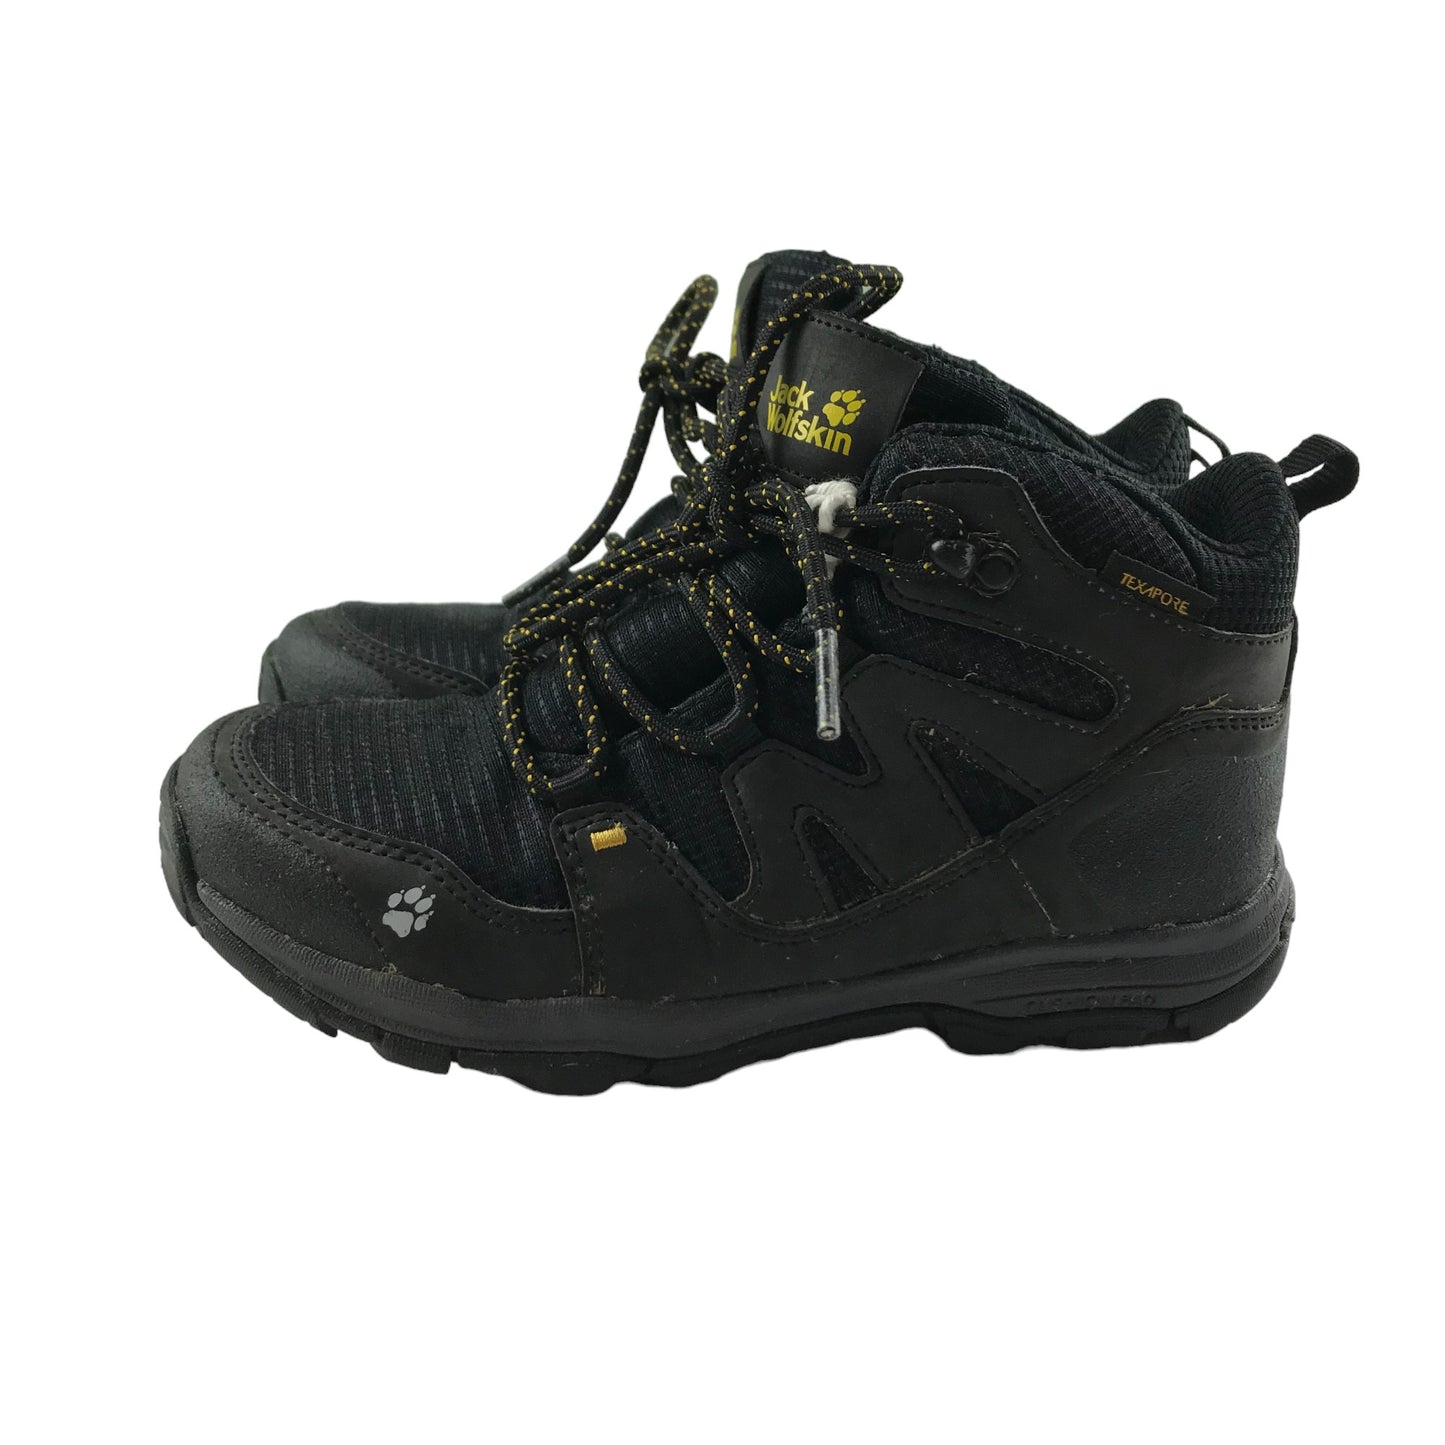 Jack Wolfskin Walking Boots Shoe Size 13 Junior Black Texapore with Laces